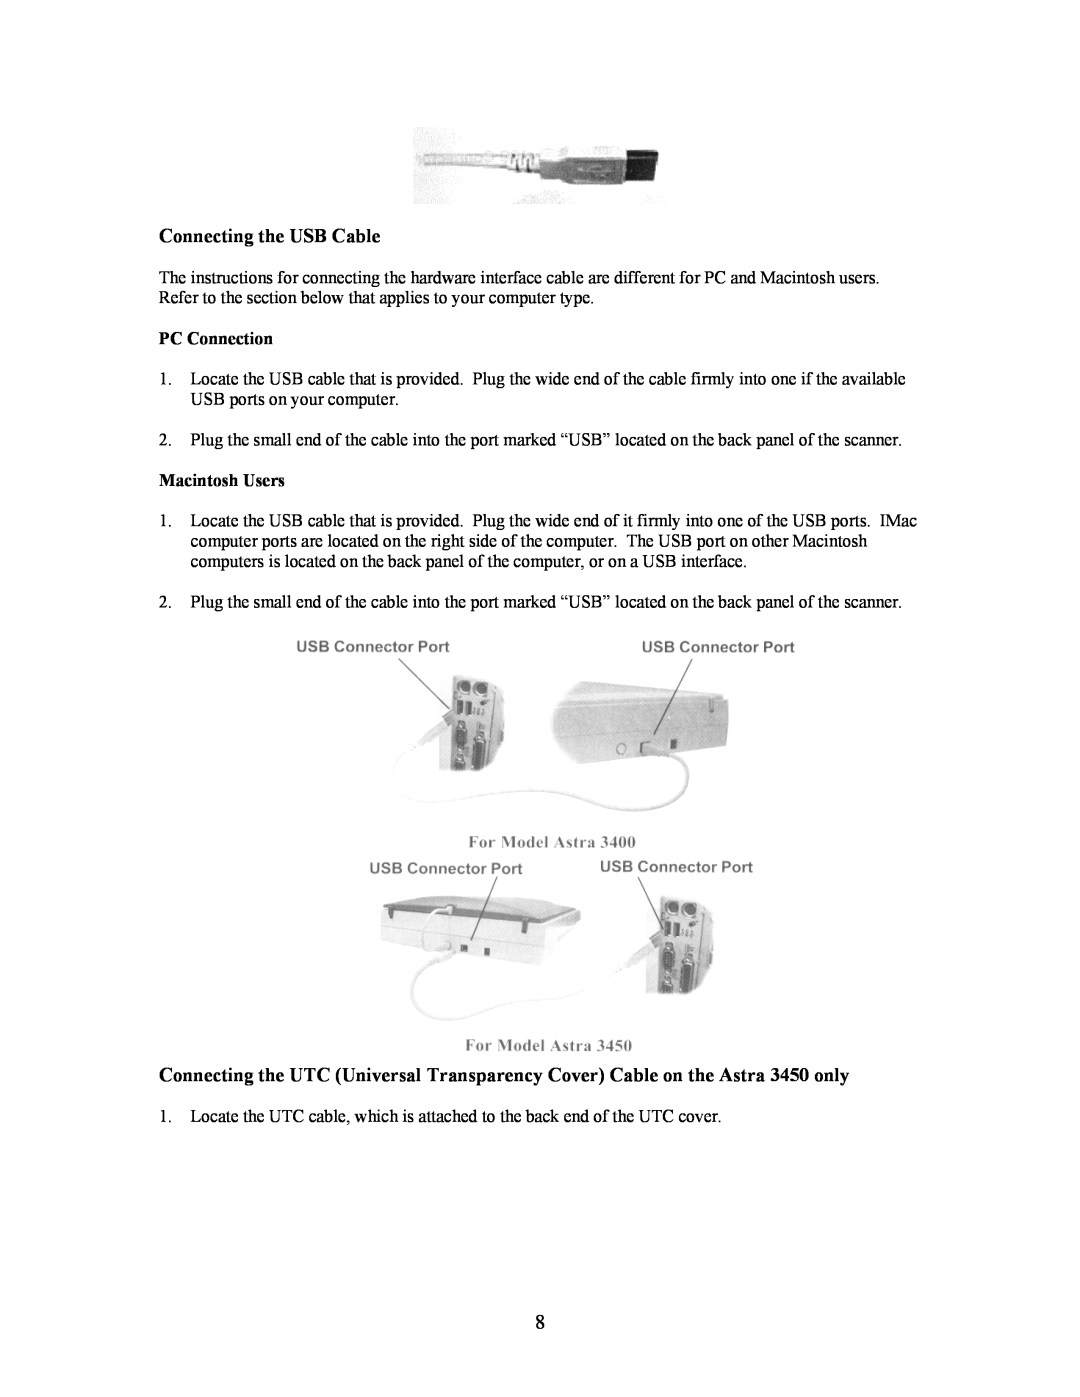 UMAX Technologies Astra 3400, 3450 owner manual Connecting the USB Cable, PC Connection, Macintosh Users 